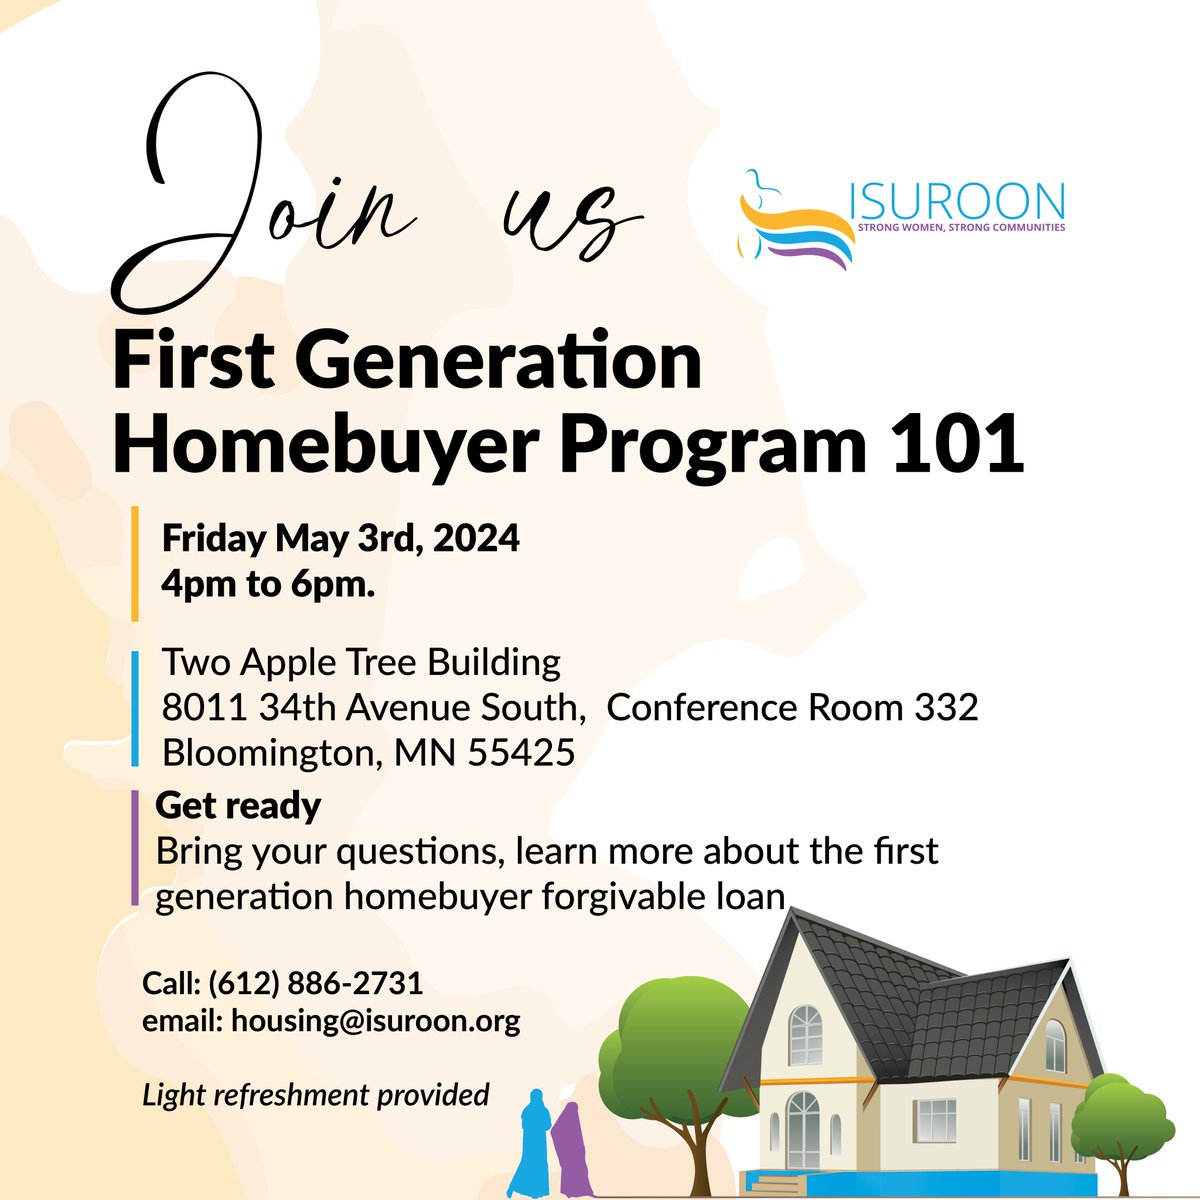 Bring your questions! learn more about the first-generation homebuyer forgivable loan! Please join us on Friday May 3rd from 4-6PM at the Two Apple Tree Buiilding, 8011 34th Ave s, Bloomington, MN 55425 in the conference room 332 #FirstGeneration #Homebuyer